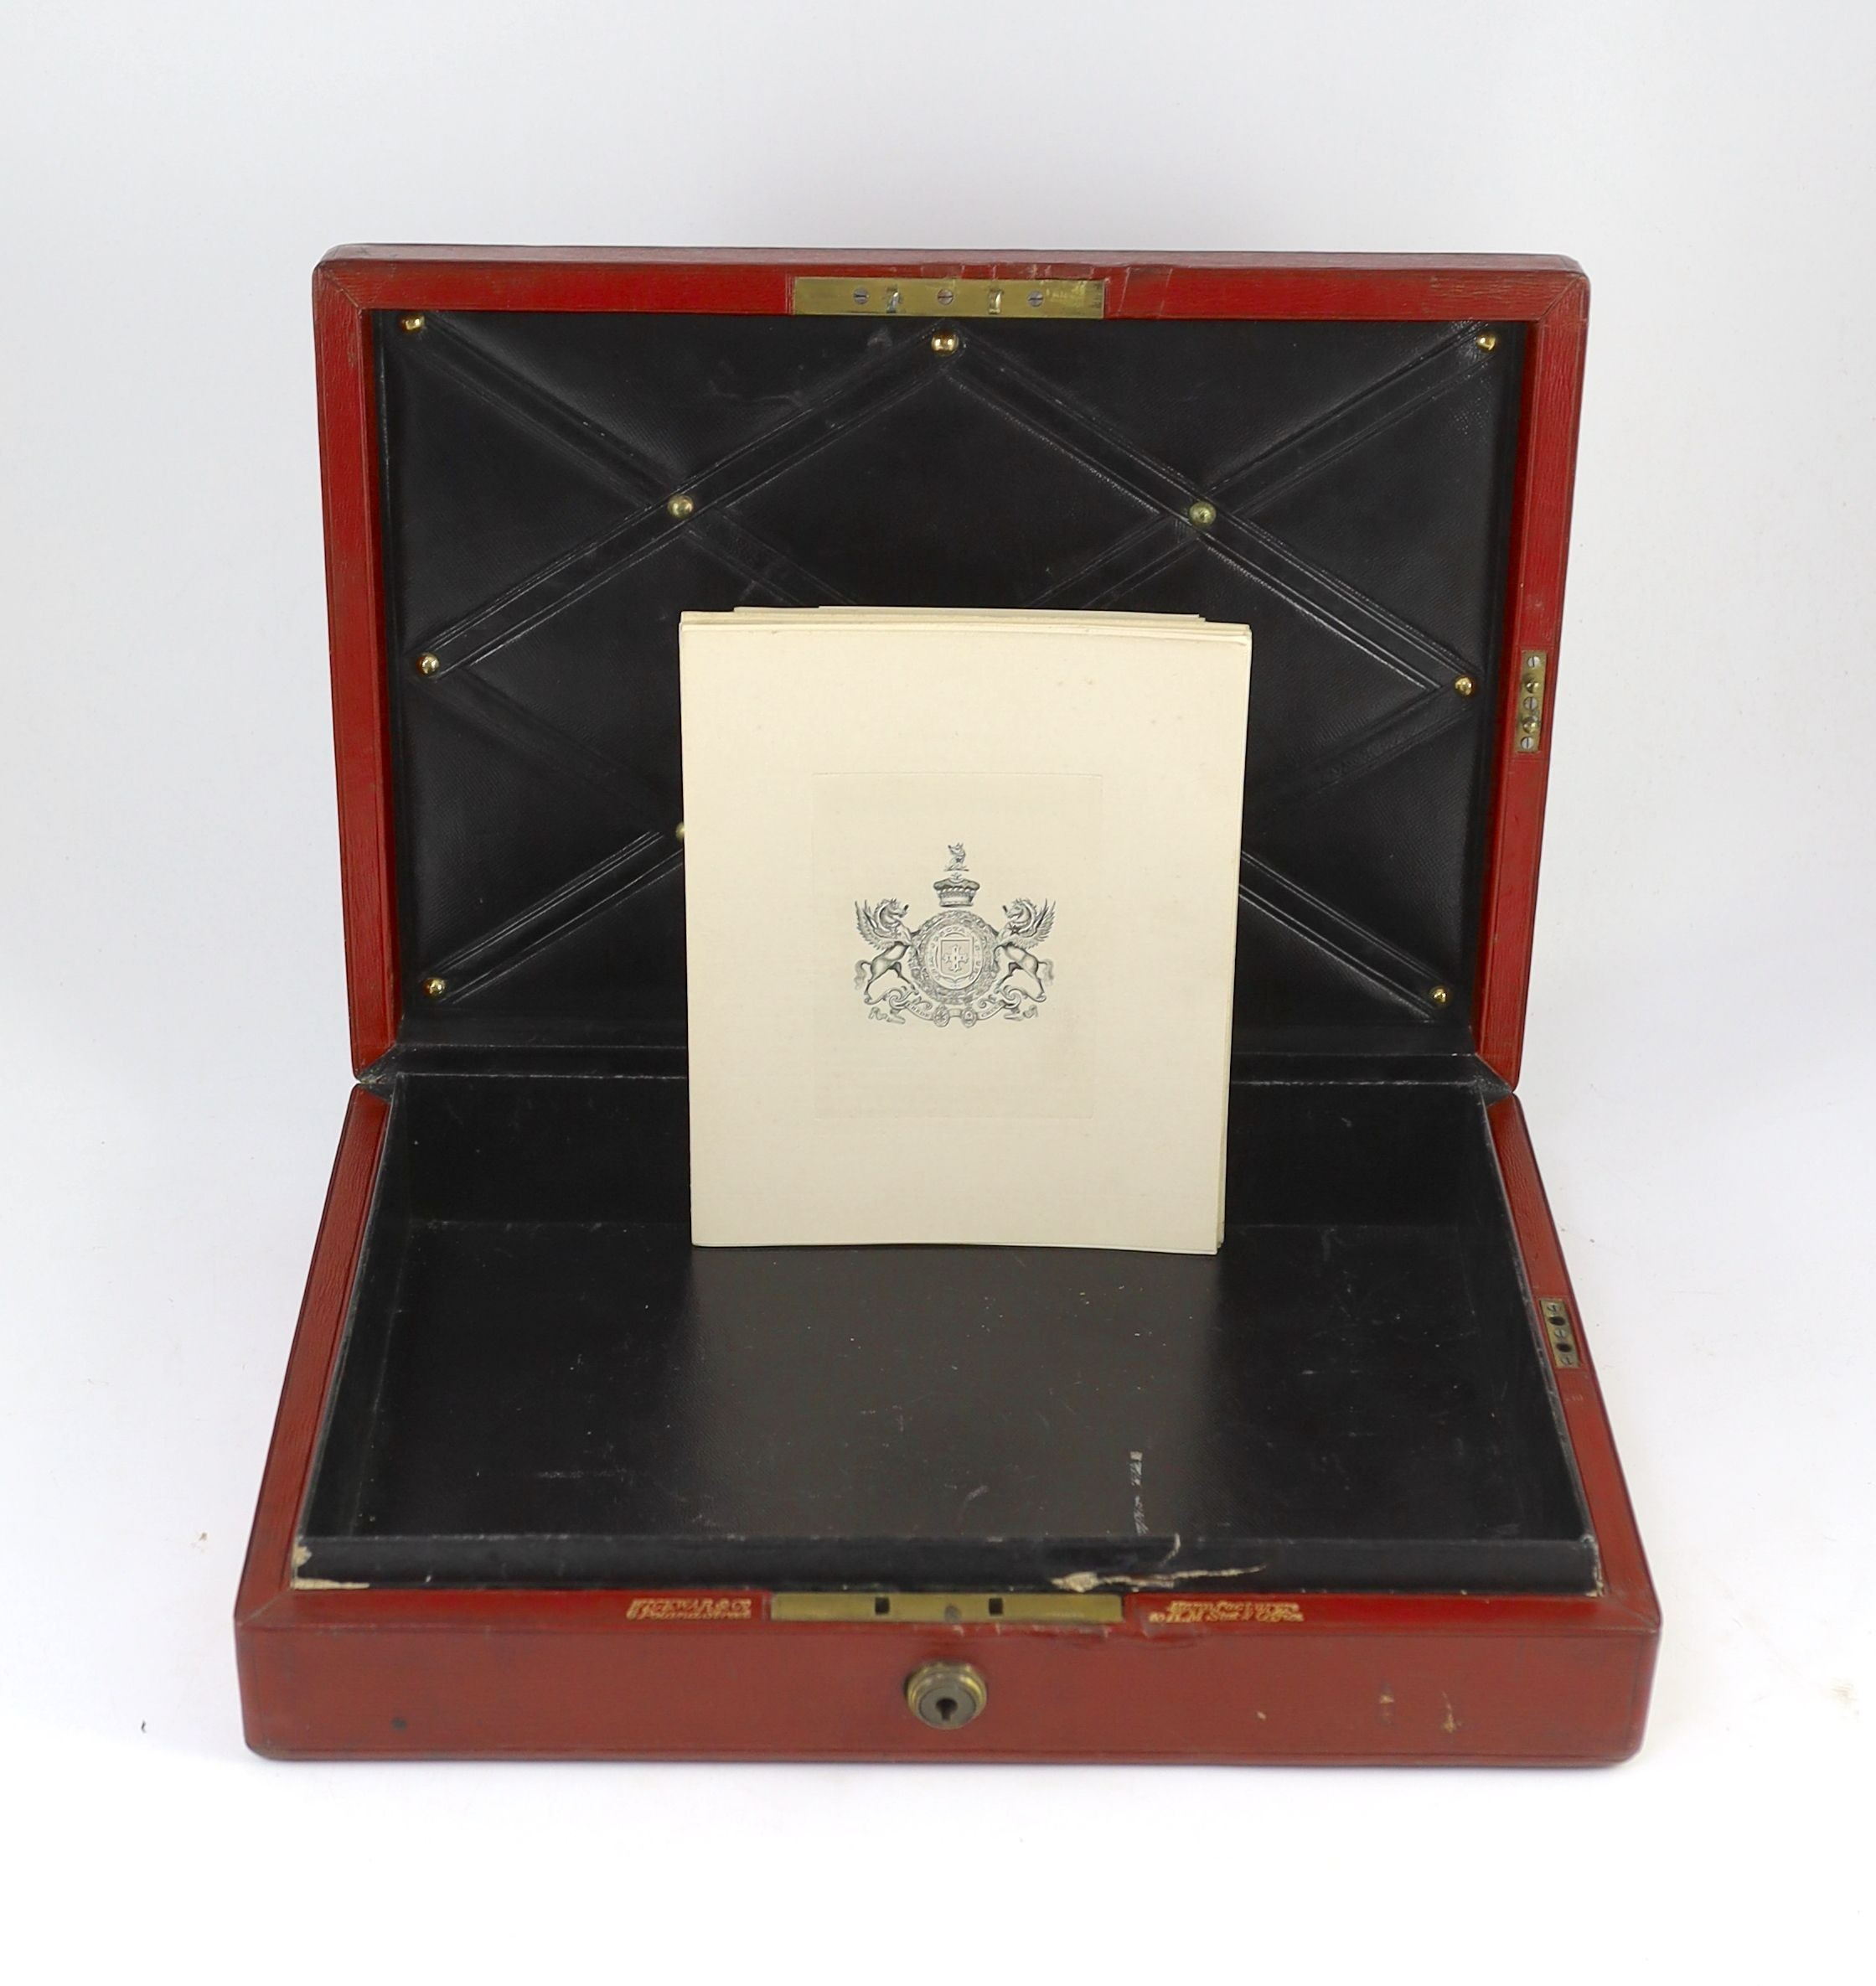 An early 20th century red morocco despatch box, formerly the property of Richard Assheton Cross, b.1882, width 42cm, depth 30cm, height 9.5cm